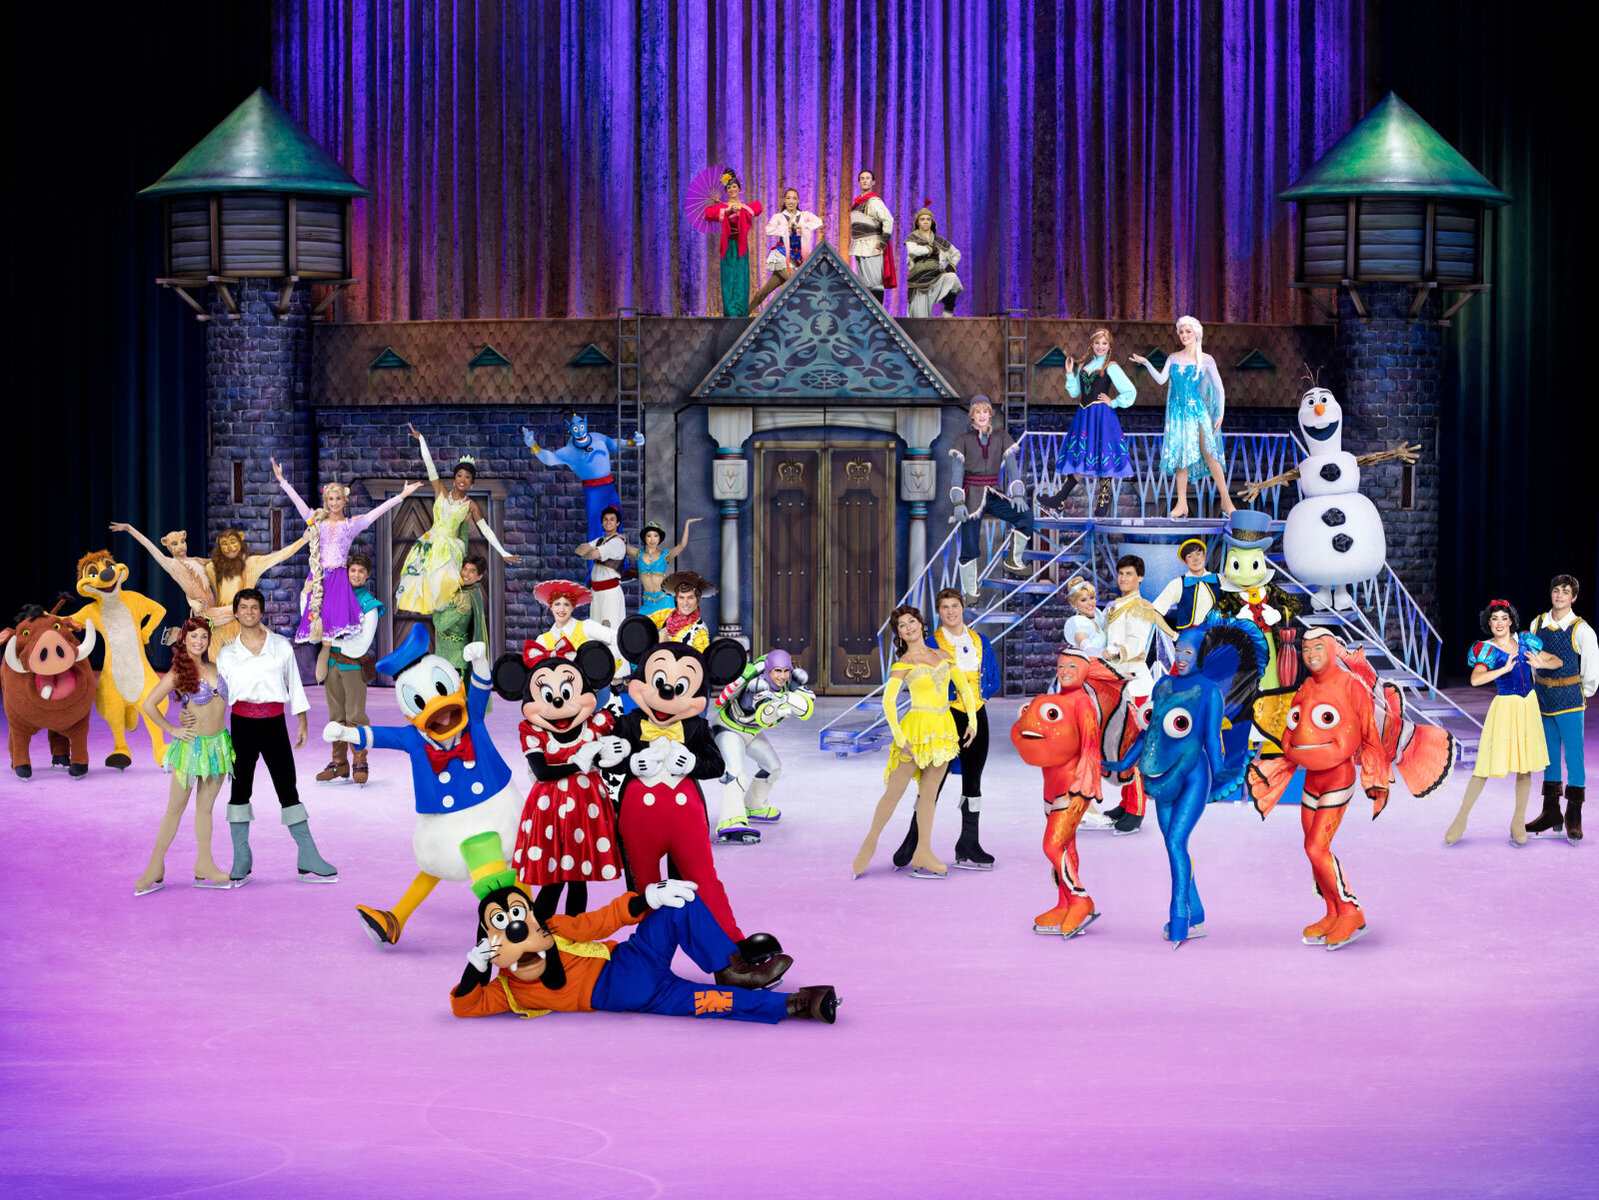 New Disney on Ice show will slide into Fiserv Forum in February